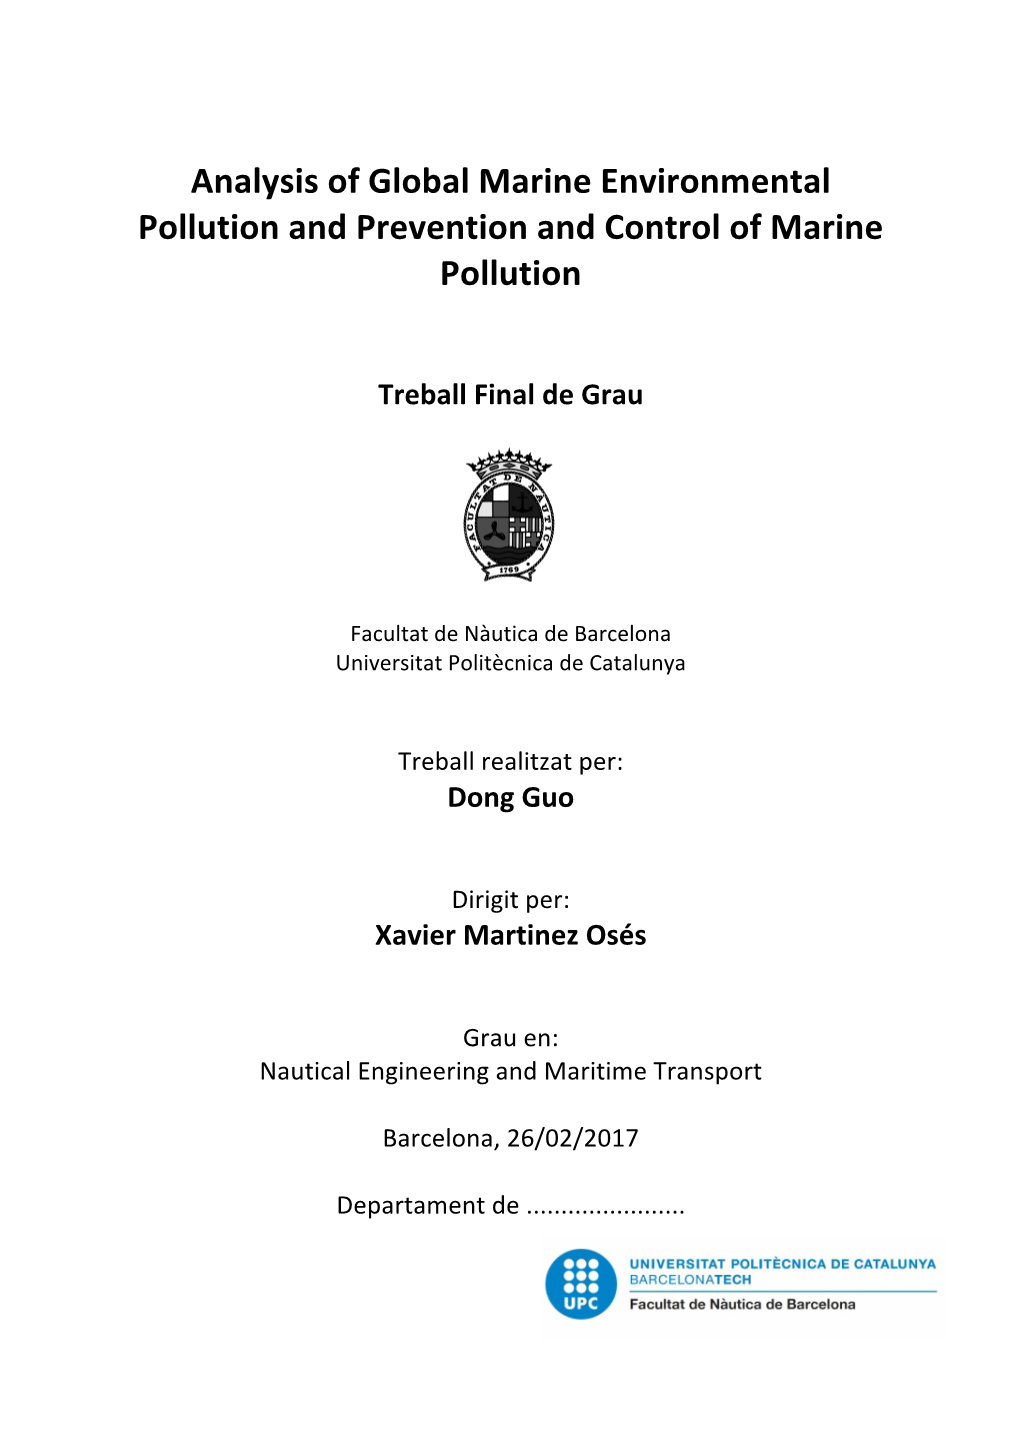 Analysis of Global Marine Environmental Pollution and Prevention and Control of Marine Pollution